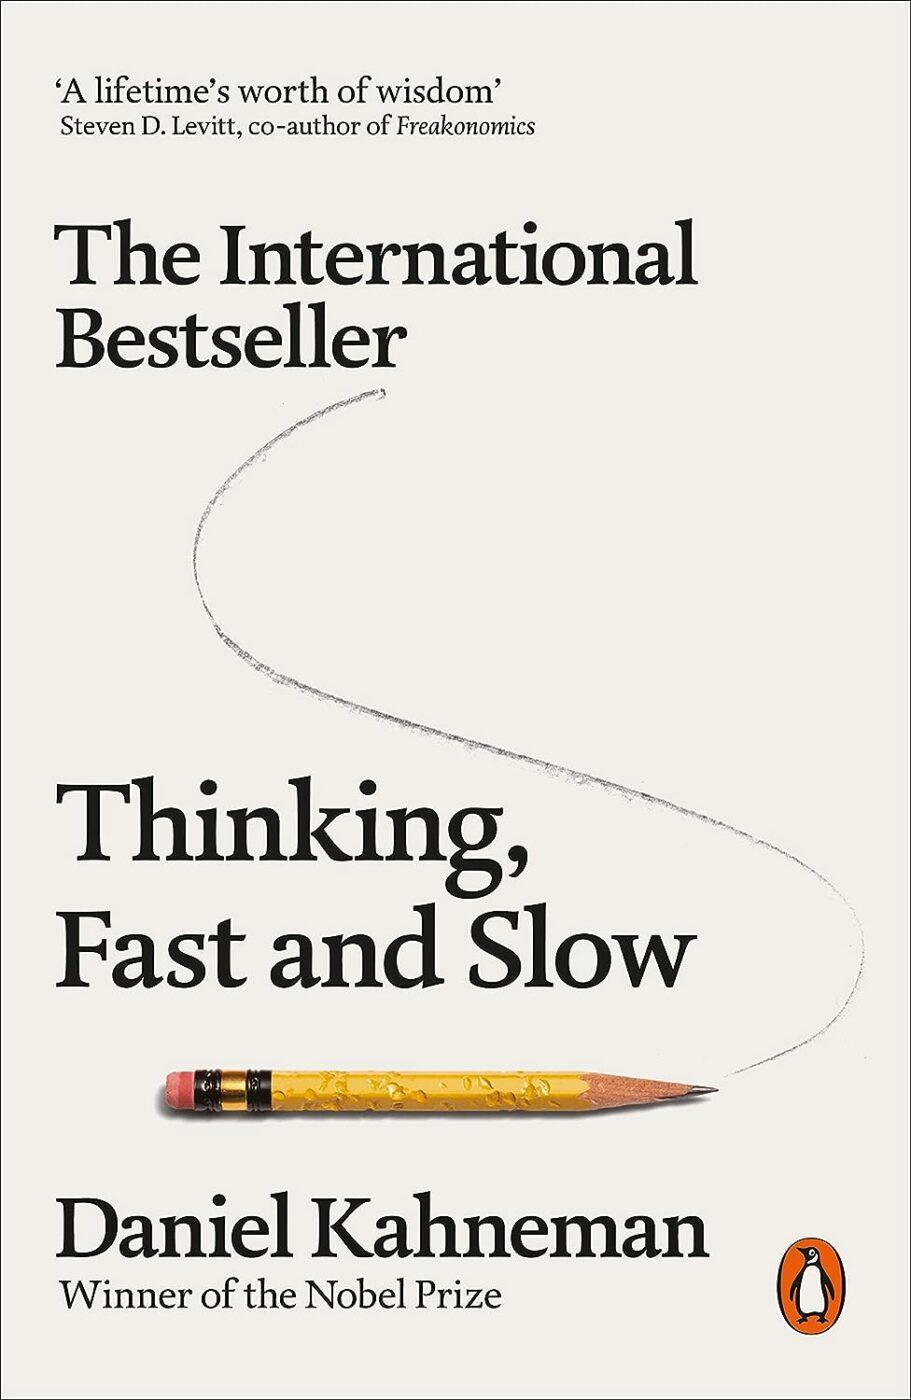 Thinking, Fast and Slow Book Summary